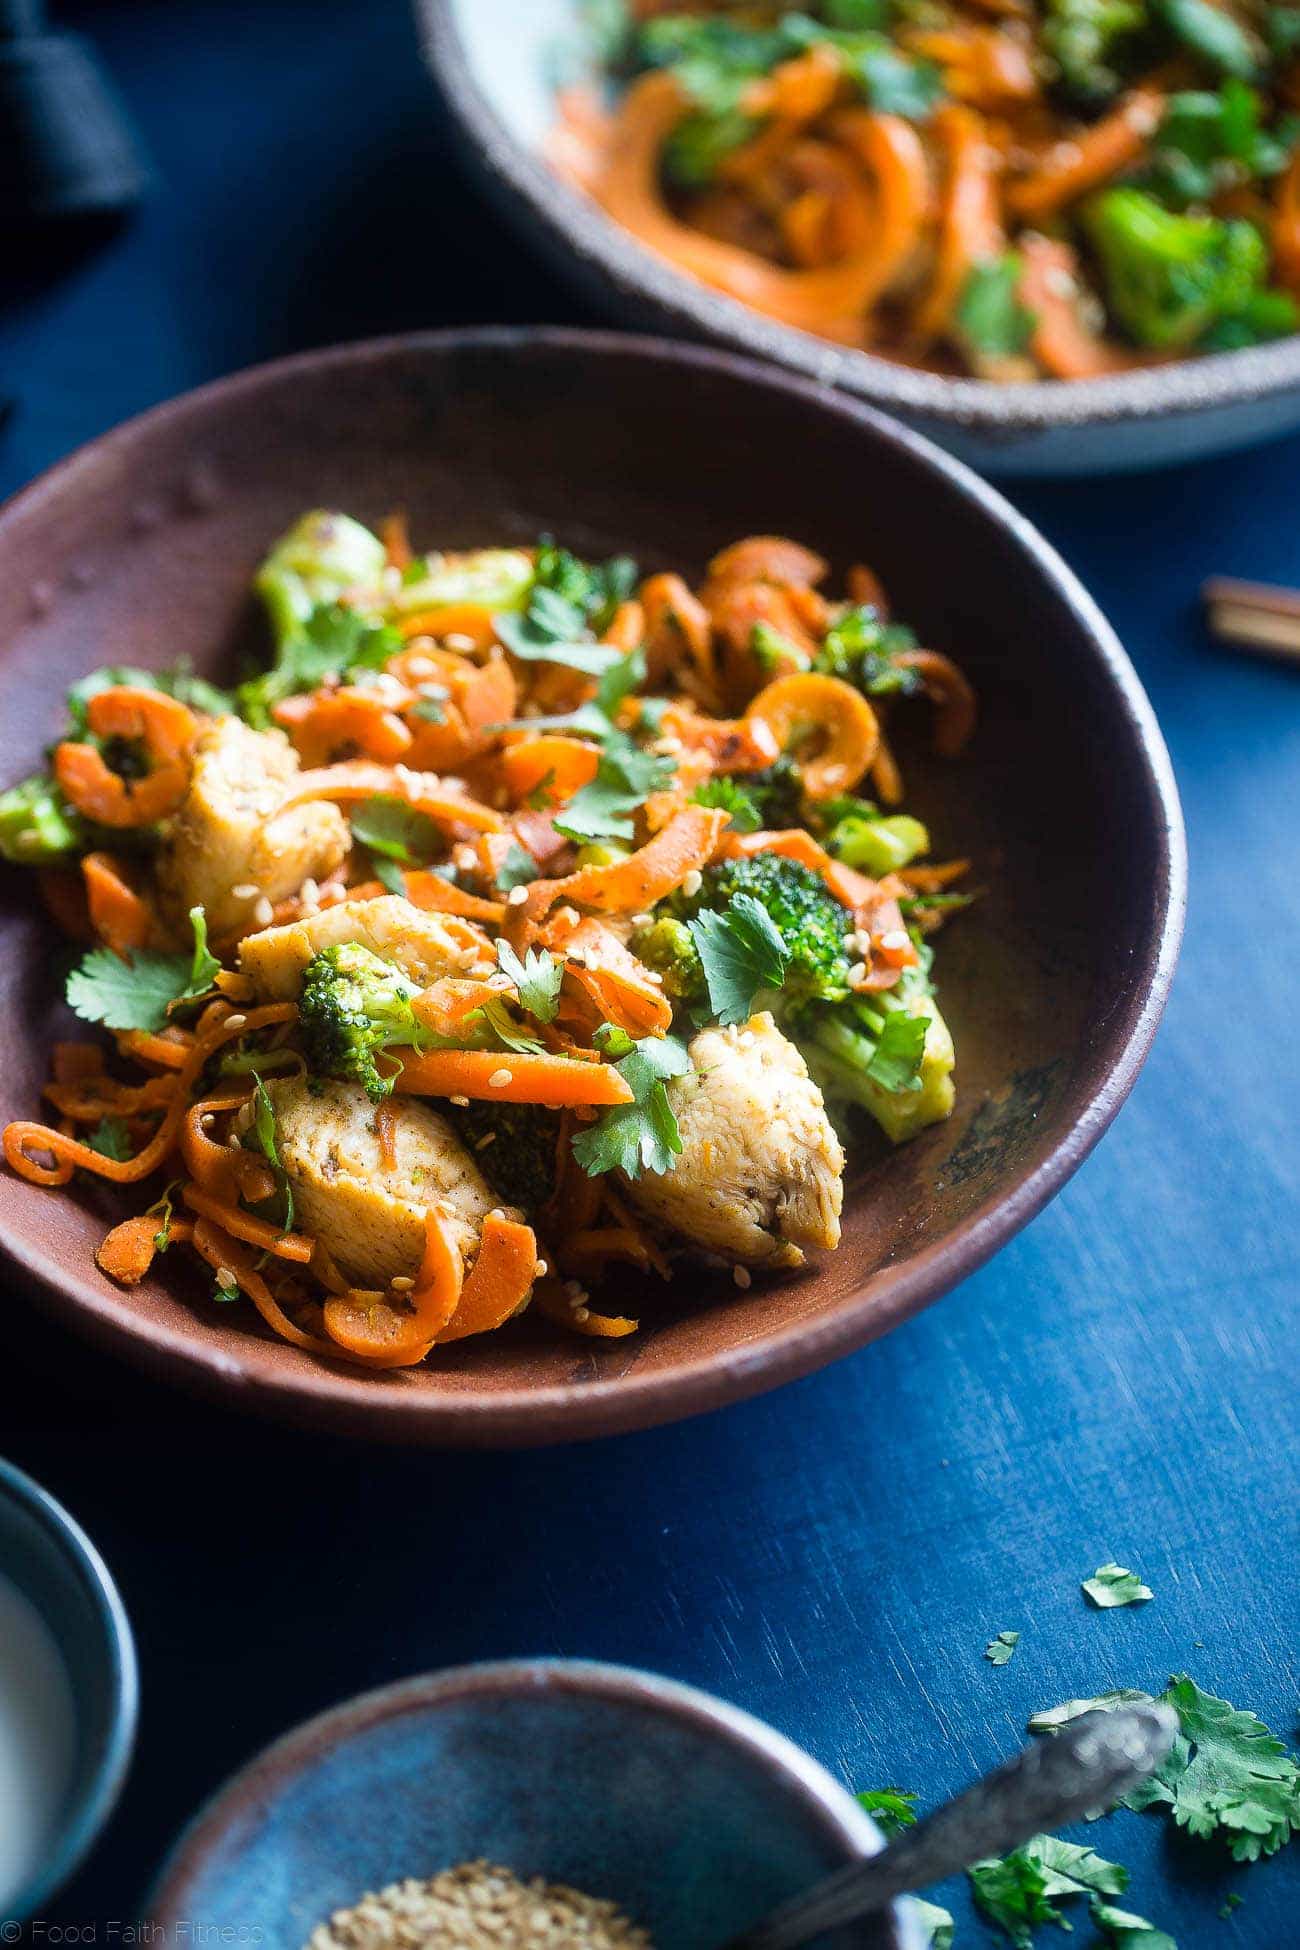 Whole30 Chicken Stir Fry with Cumin Coconut Carrot Noodles - This gluten free, low carb chicken stir fry has creamy coconut, coriander and cardamom! Add broccoli and carrot noodles for a quick and easy, paleo weeknight dinner! | Foodfaithfitness.com | @FoodFaithFit